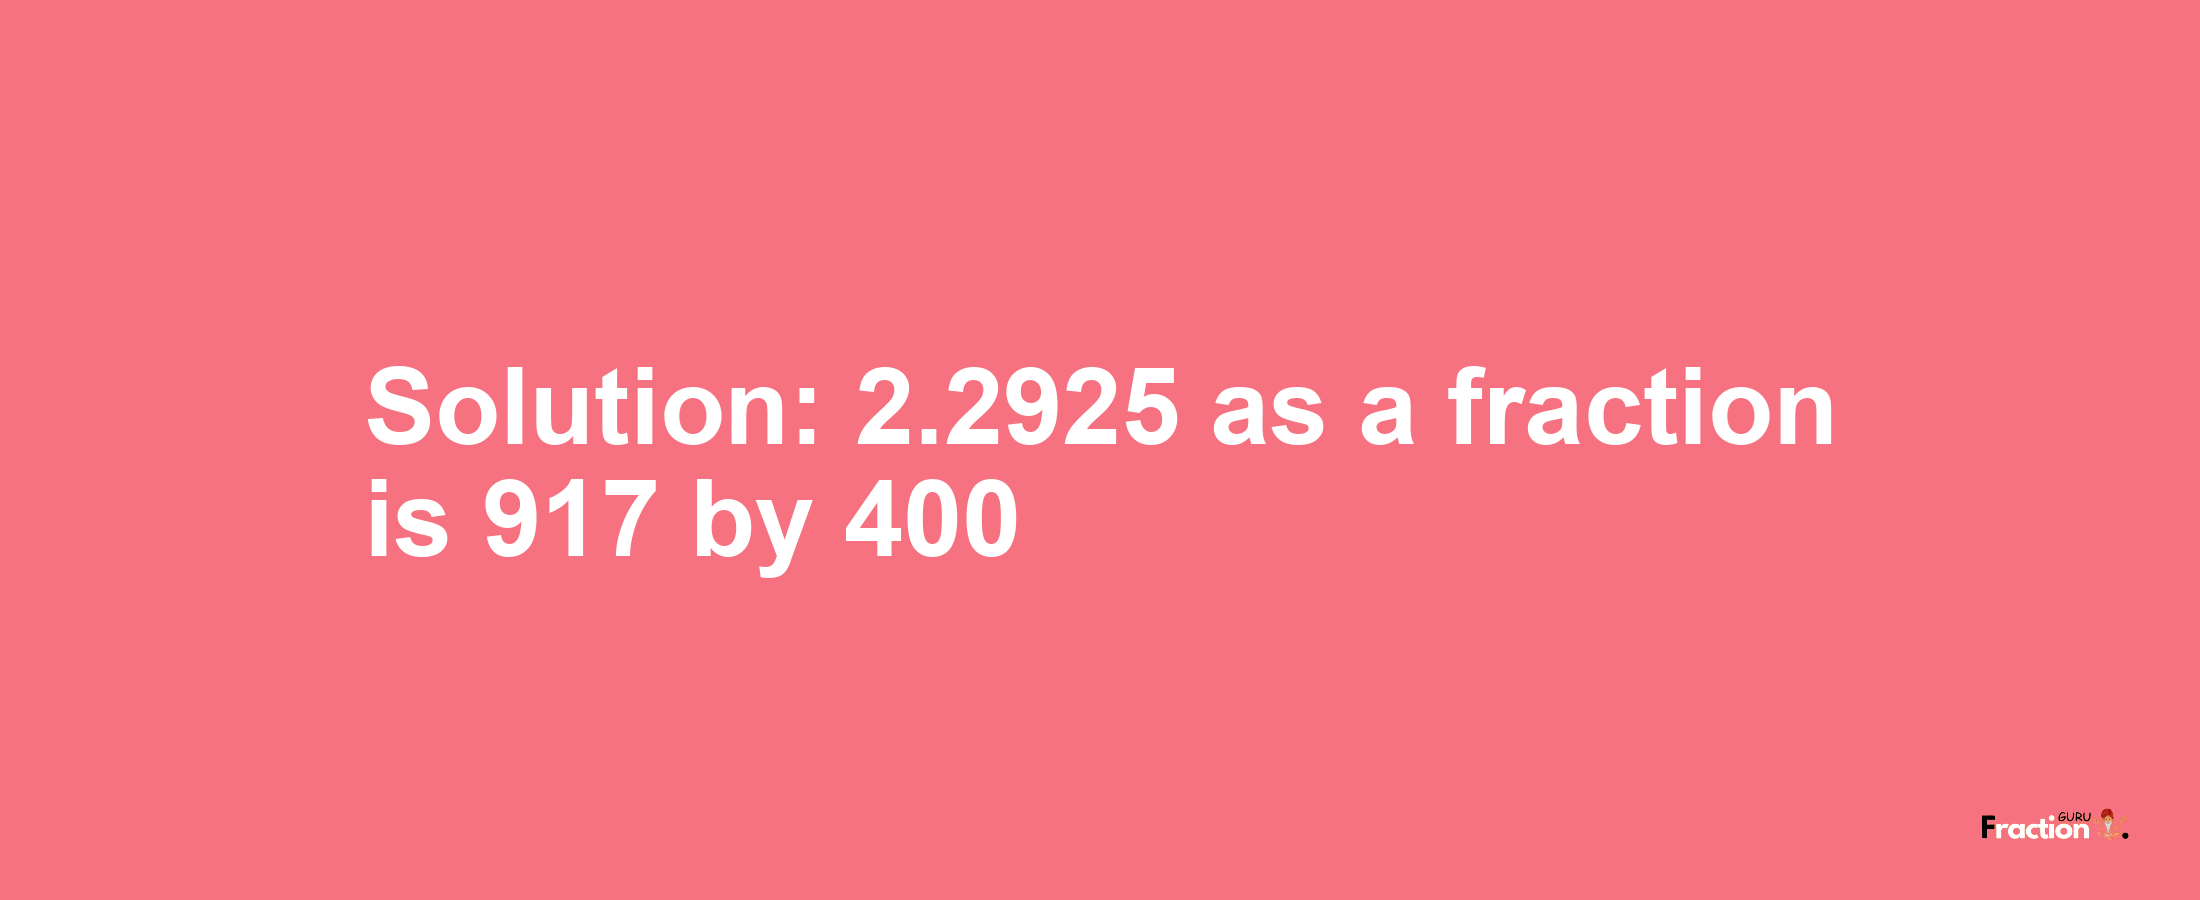 Solution:2.2925 as a fraction is 917/400